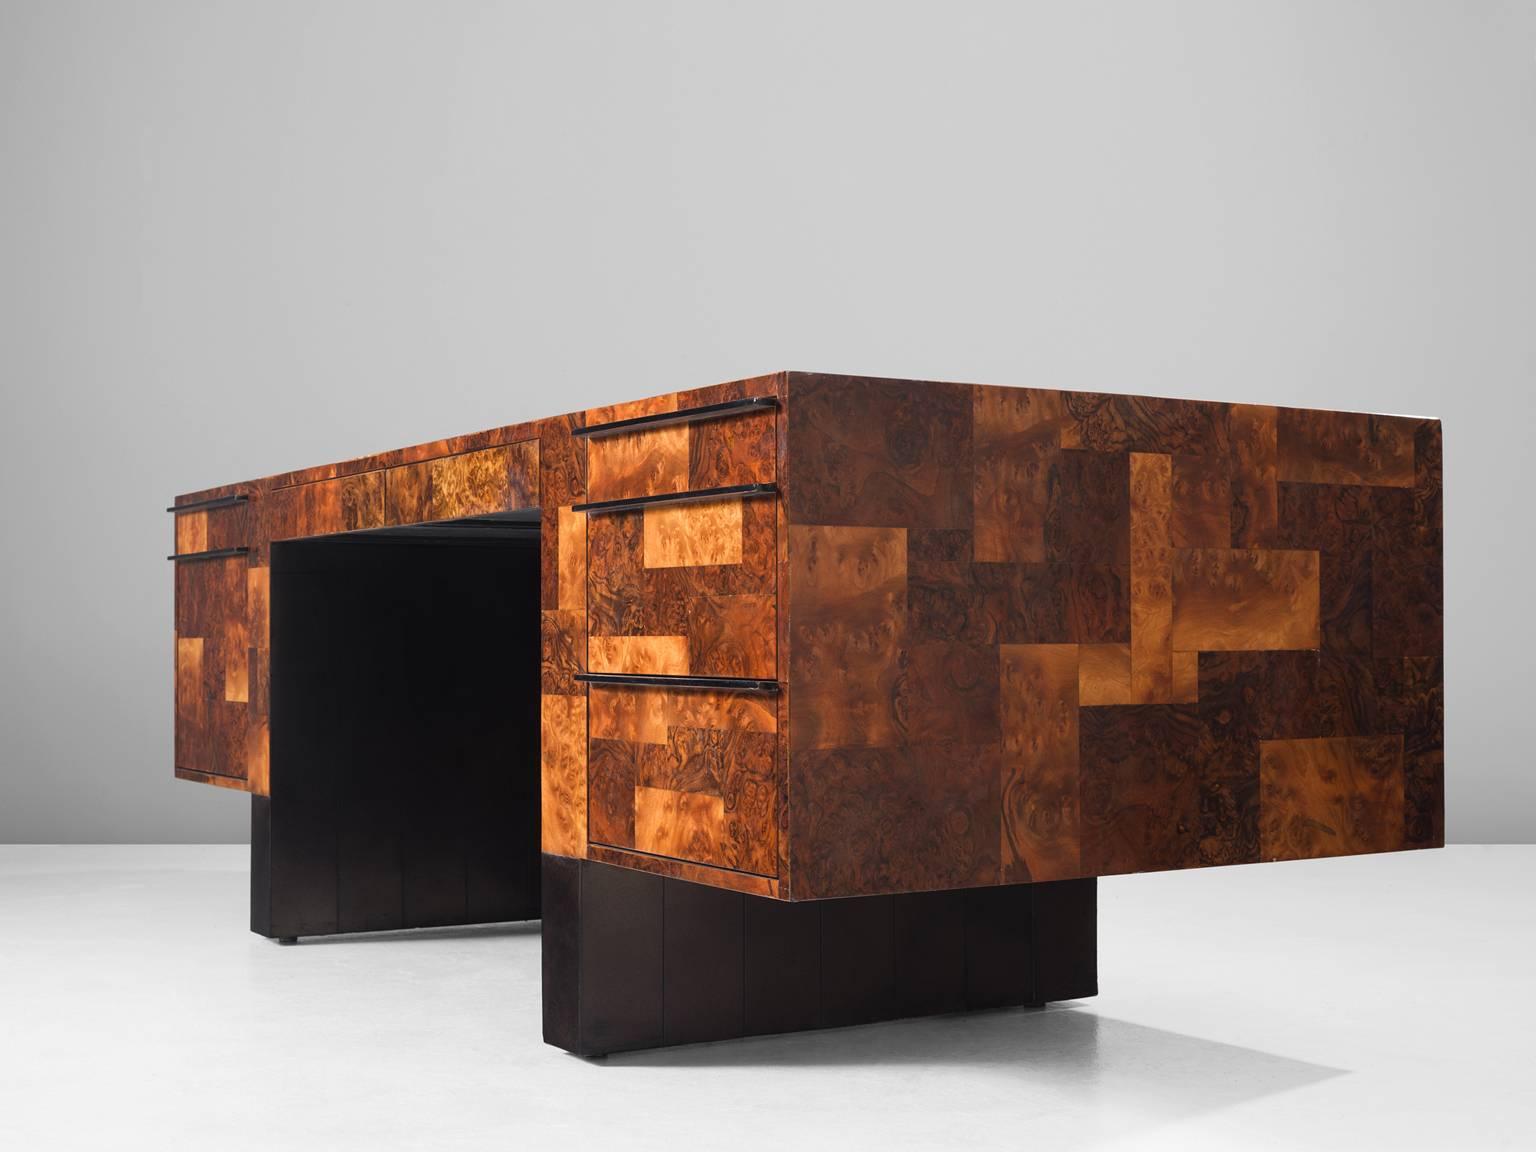 'City Scape' Desk, in different types of wood, by Paul Evans, United States 1970s.

Large desk with a patchwork pattern of different sorts of wood. The design is simplistic with straight lines and cubic forms. The different sorts of wood and